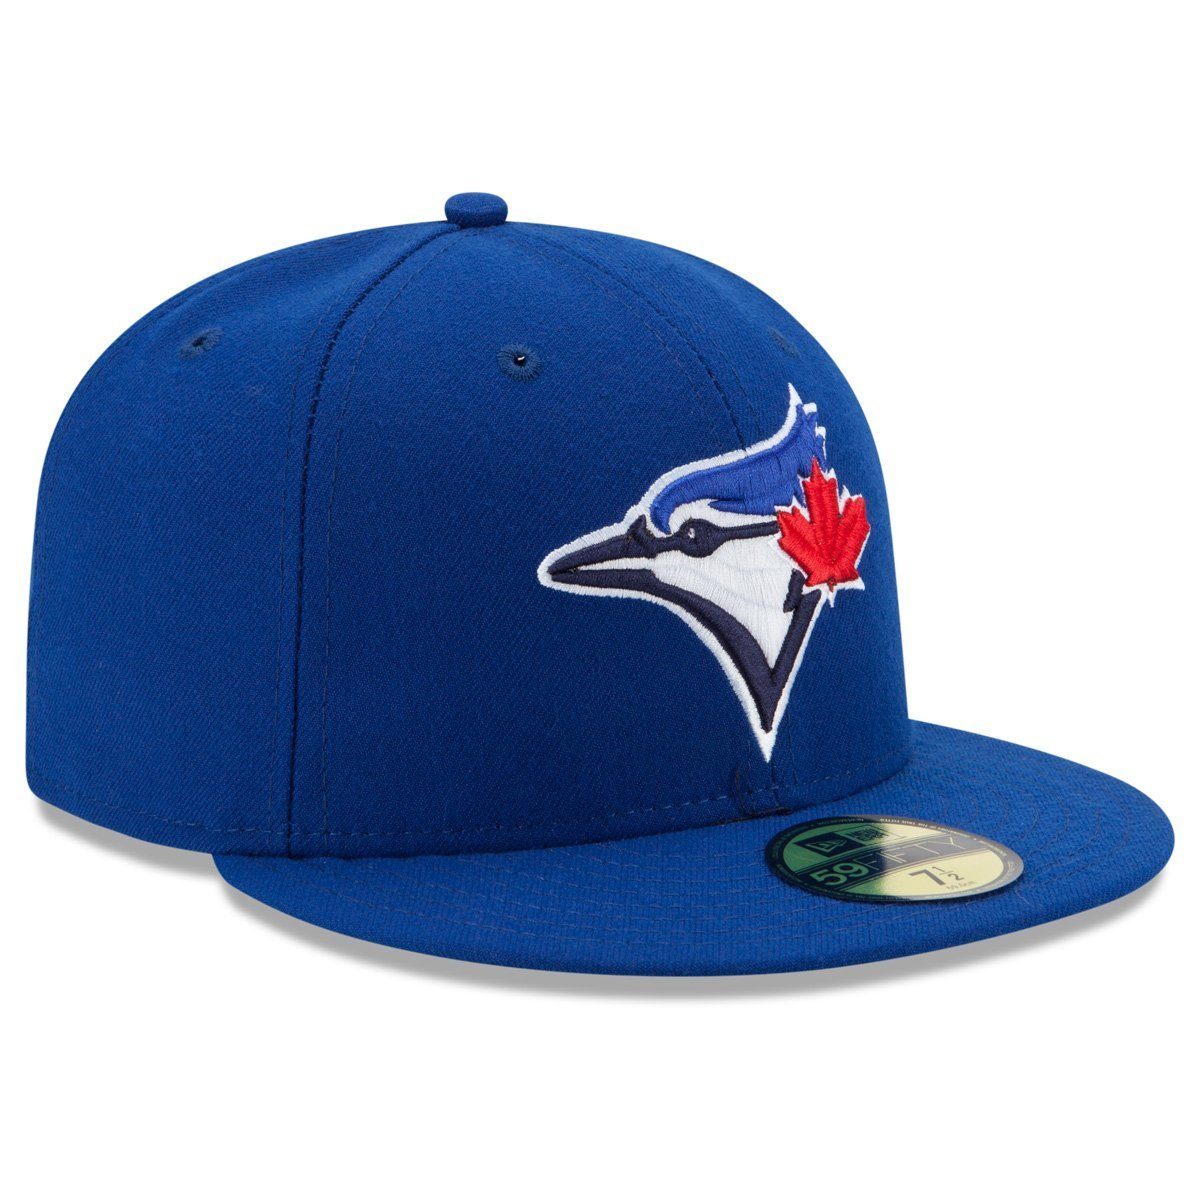 Jays ONFIELD AUTHENTIC New Era Toronto Cap Fitted 59Fifty